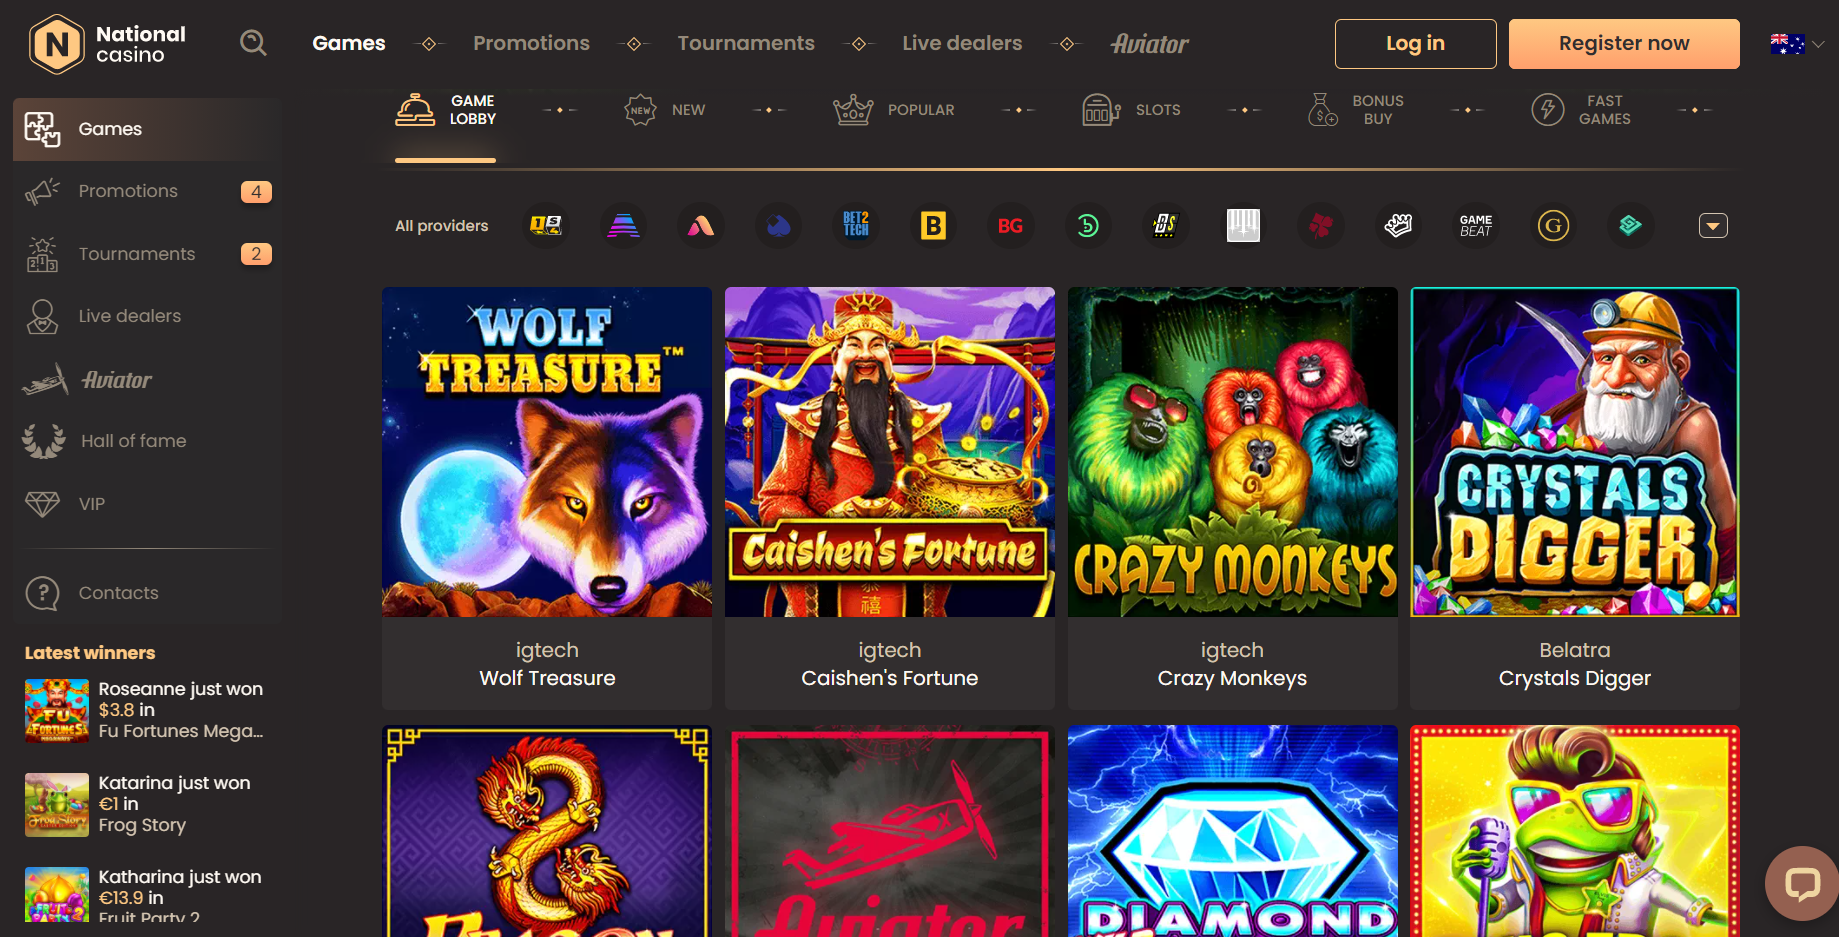 national casino list of game